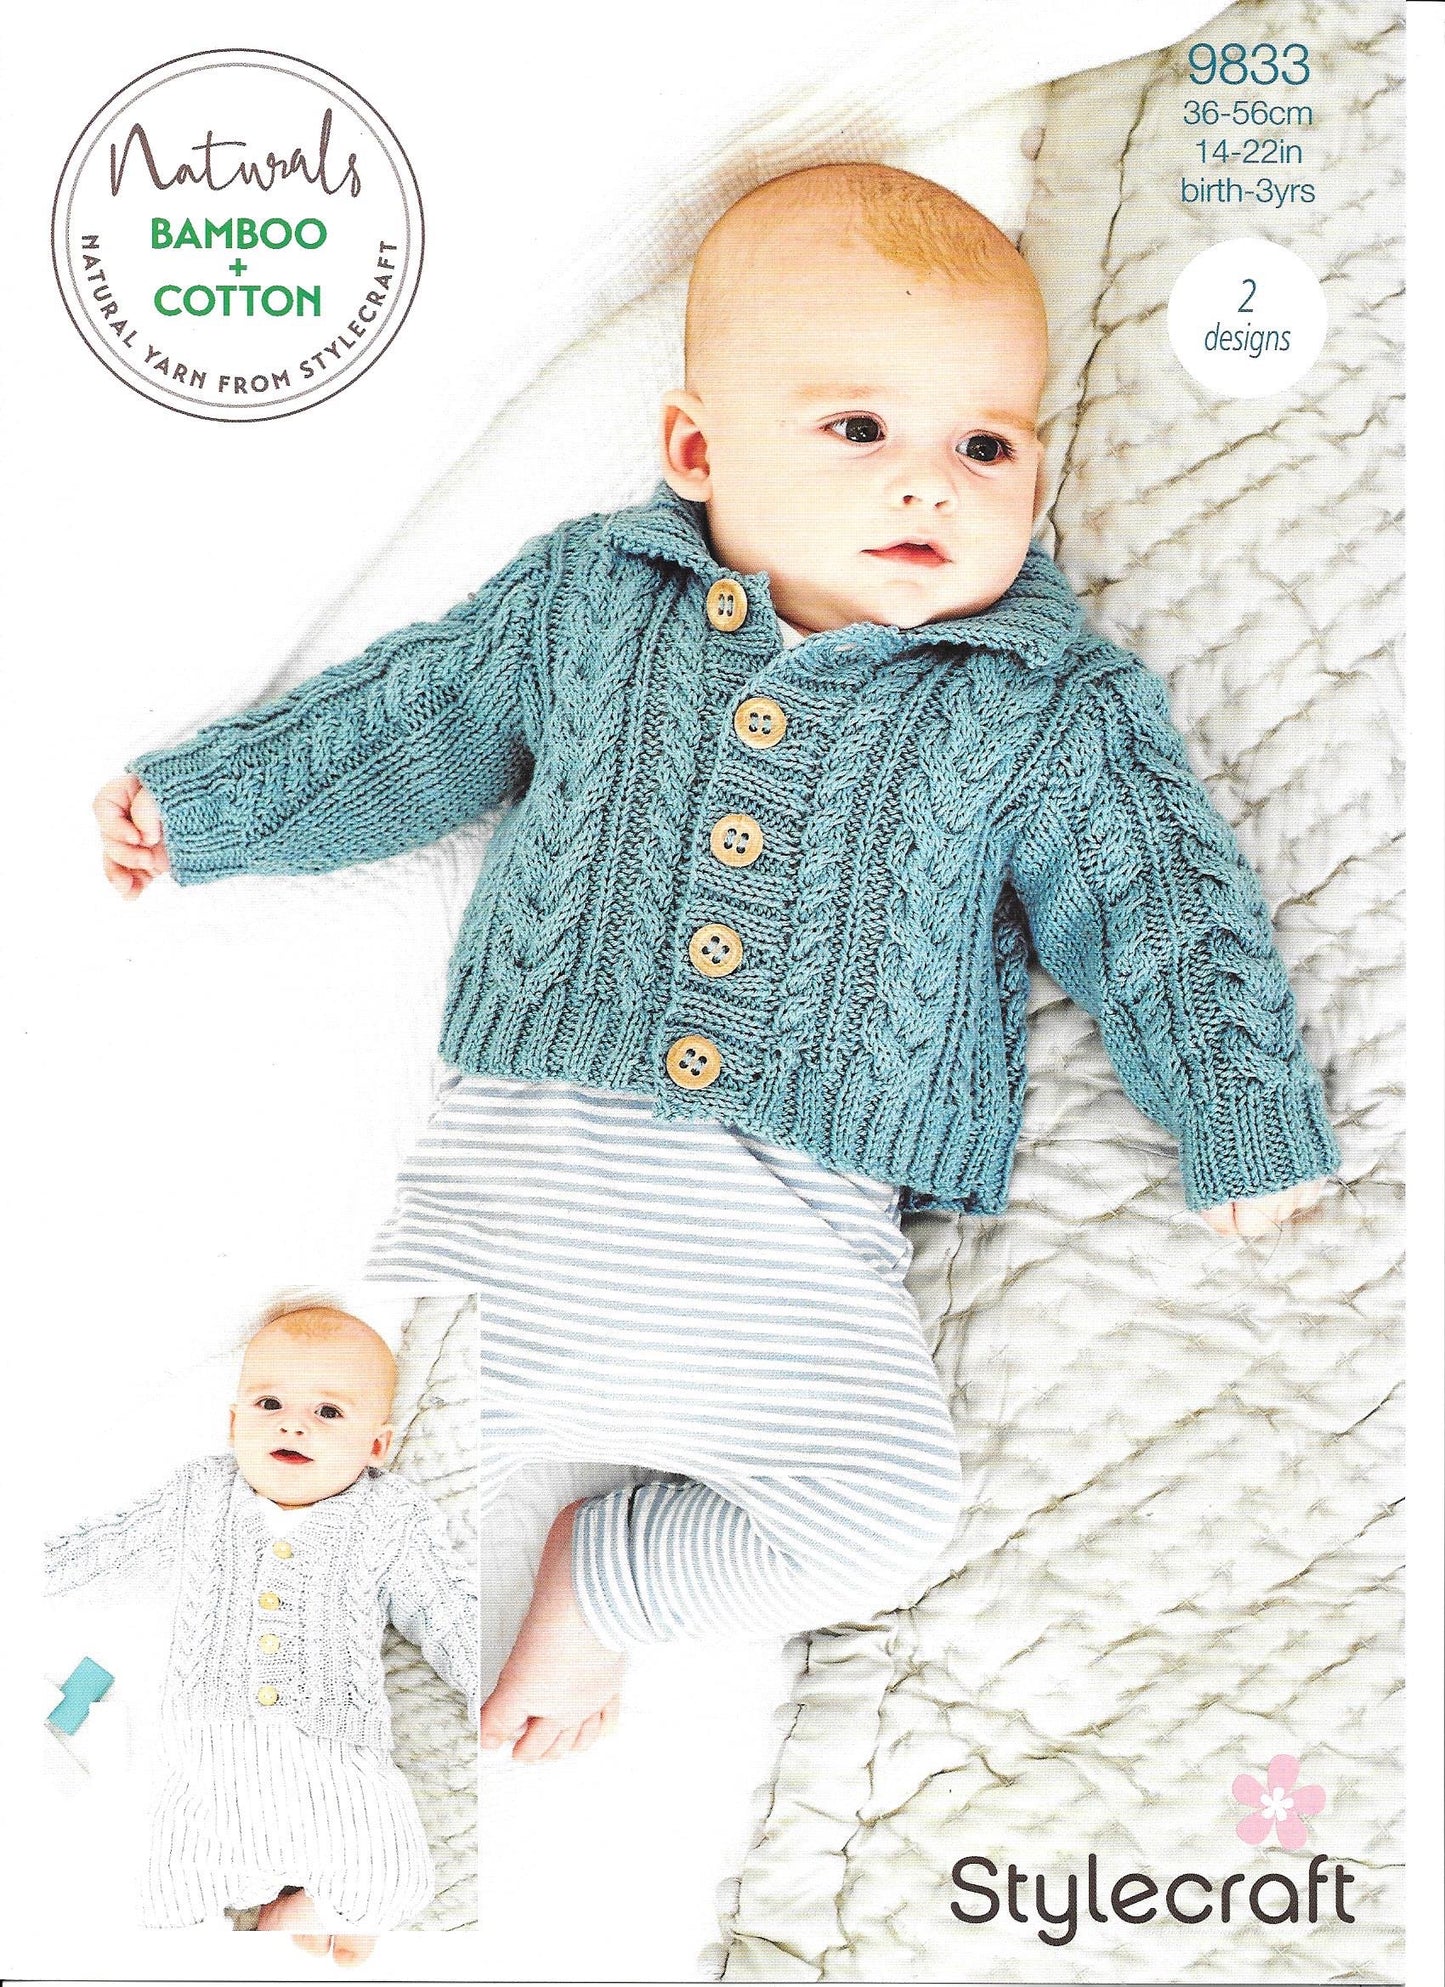 9833 Stylecraft Naturals Bamboo and cotton baby child cardigans knitting pattern